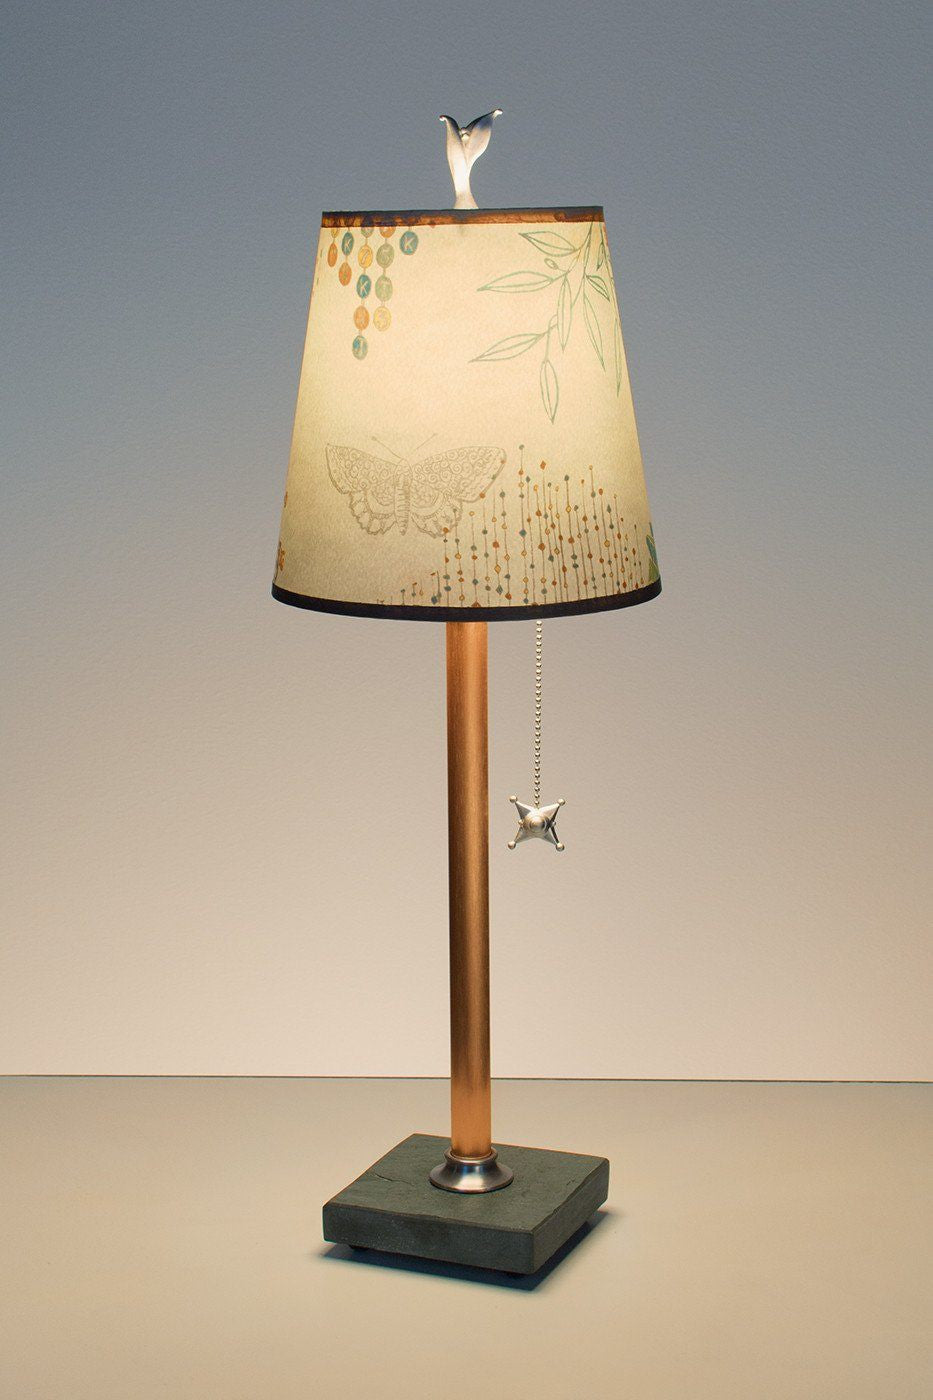 Janna Ugone &amp; Co Table Lamps Copper Table Lamp with Small Drum Shade in Ecru Journey